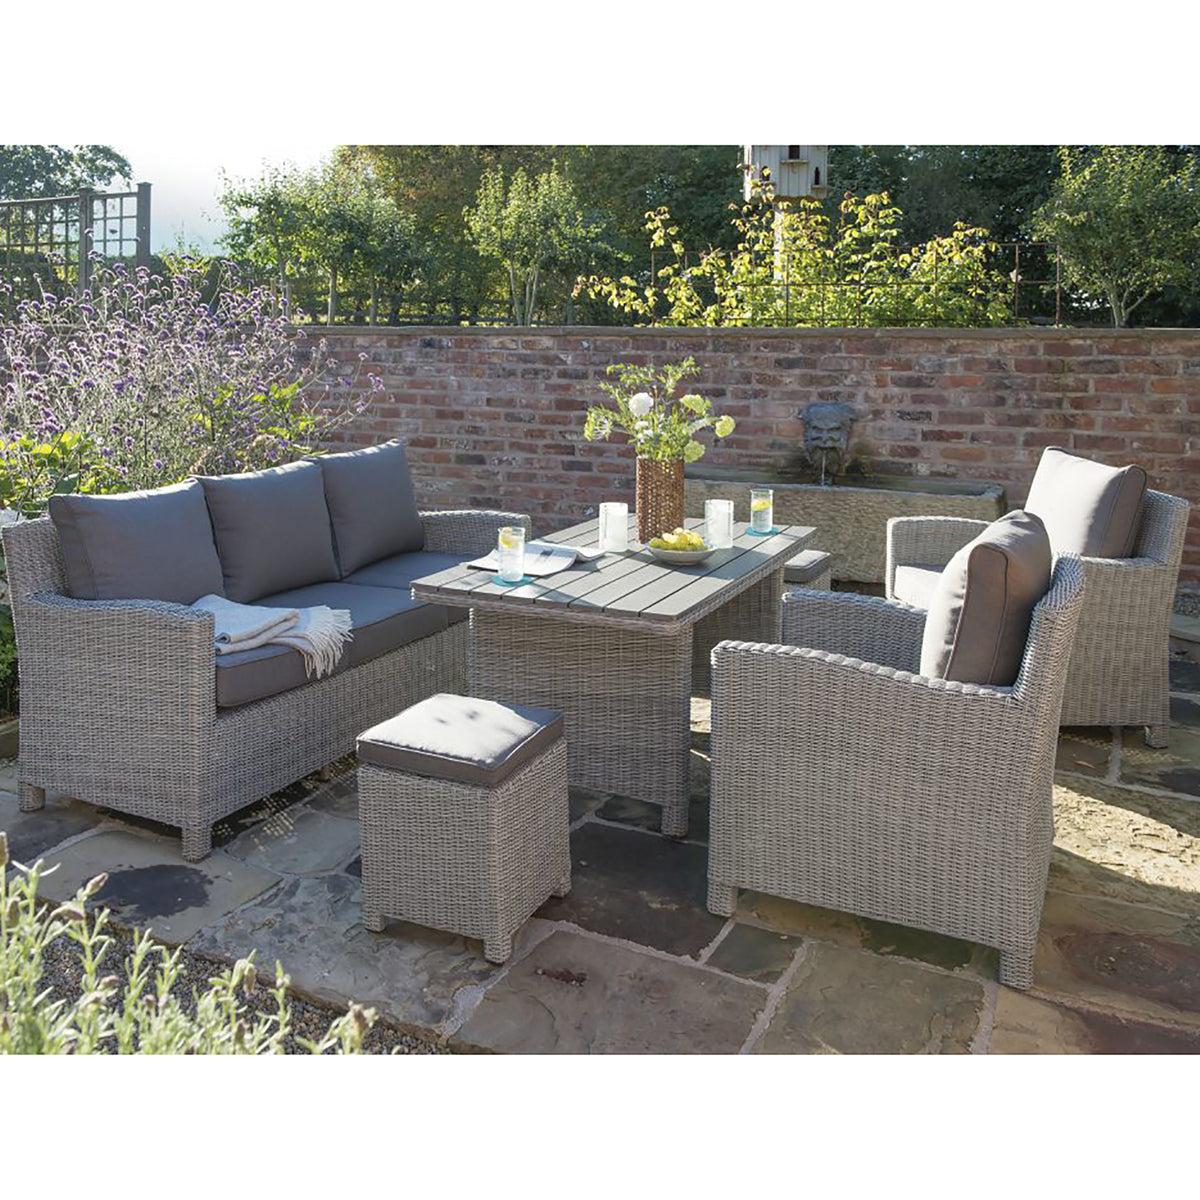 Kettler Palma White Wash Wicker Outdoor Casual Dining Lounge Sofa Set with Slat Top Table